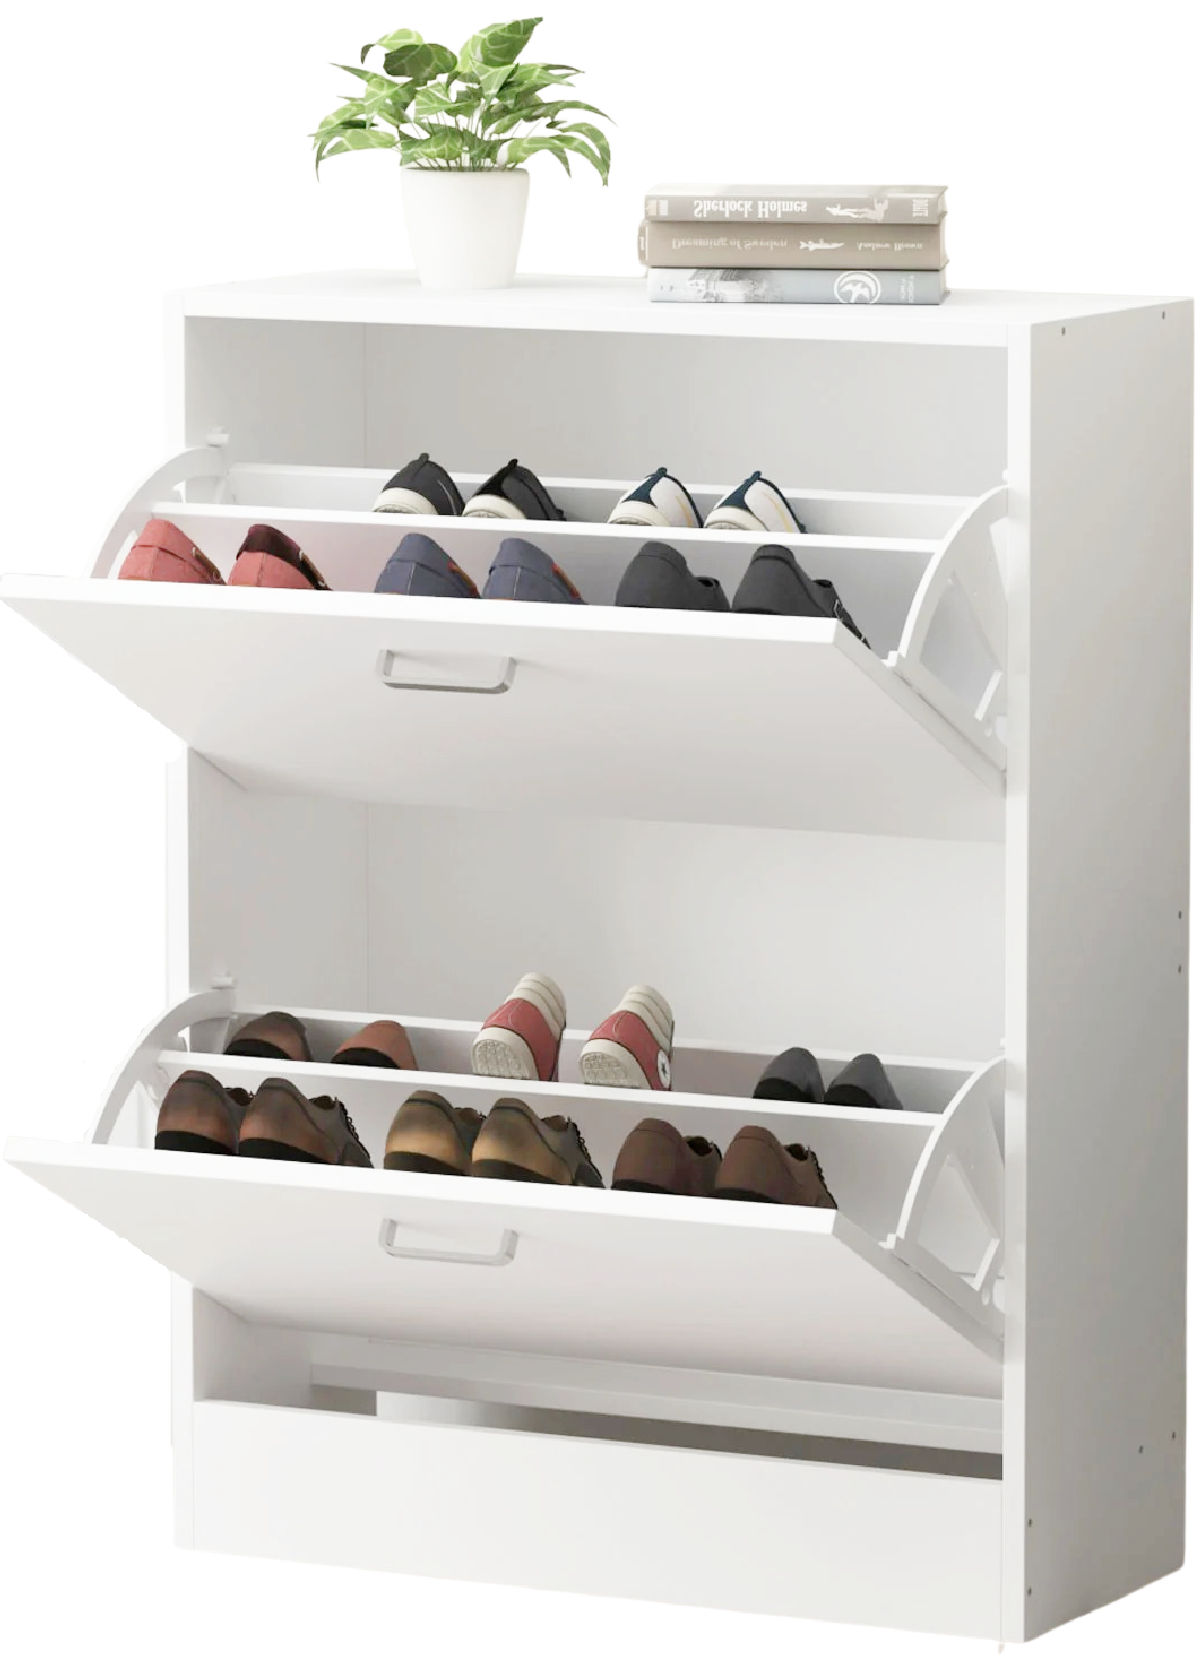 Shallow white cabinet with tilt out shoe storage - perfect for an entryway!